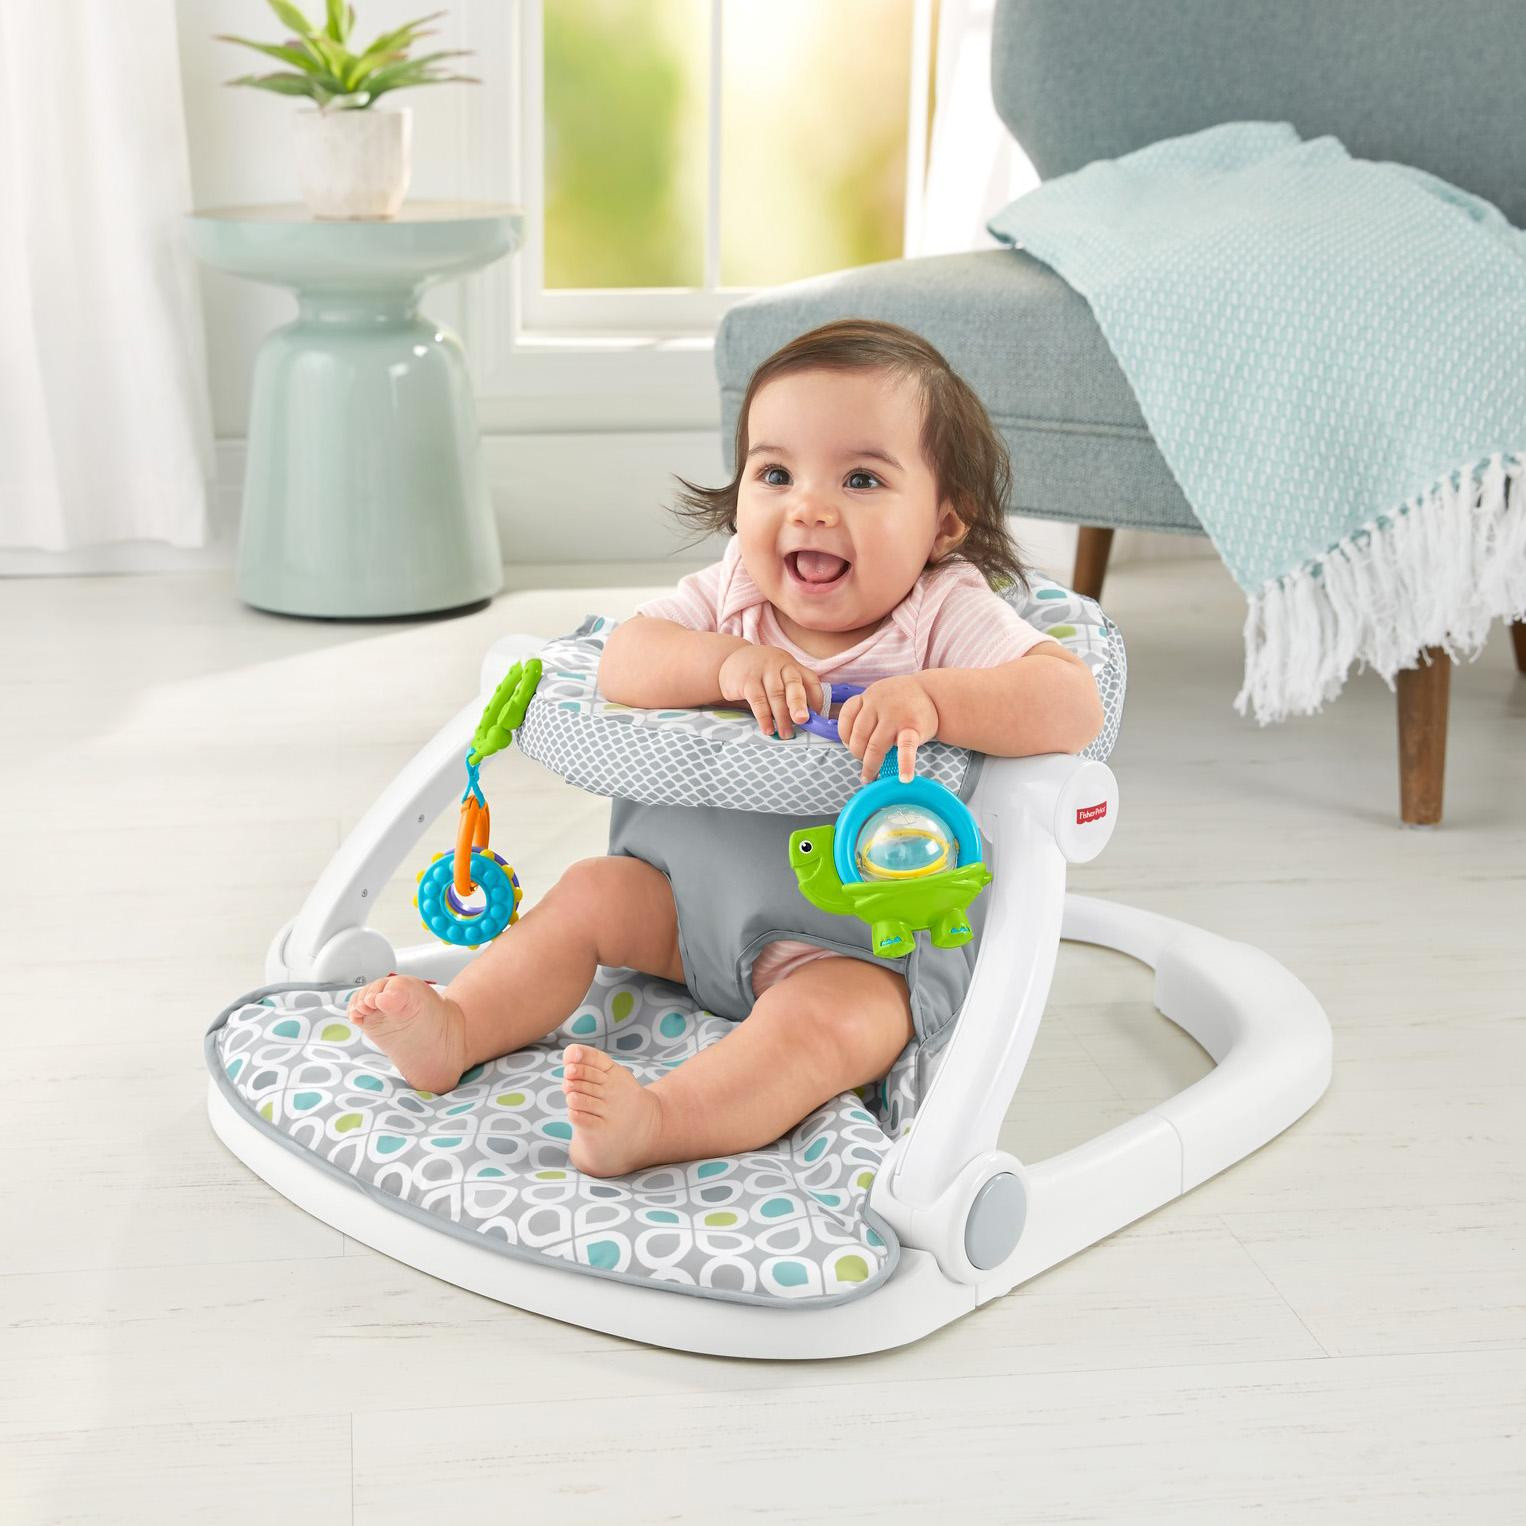 Best ideas about Baby Floor Seat
. Save or Pin Amazon Fisher Price Sit Me Up Floor Seat Baby Now.